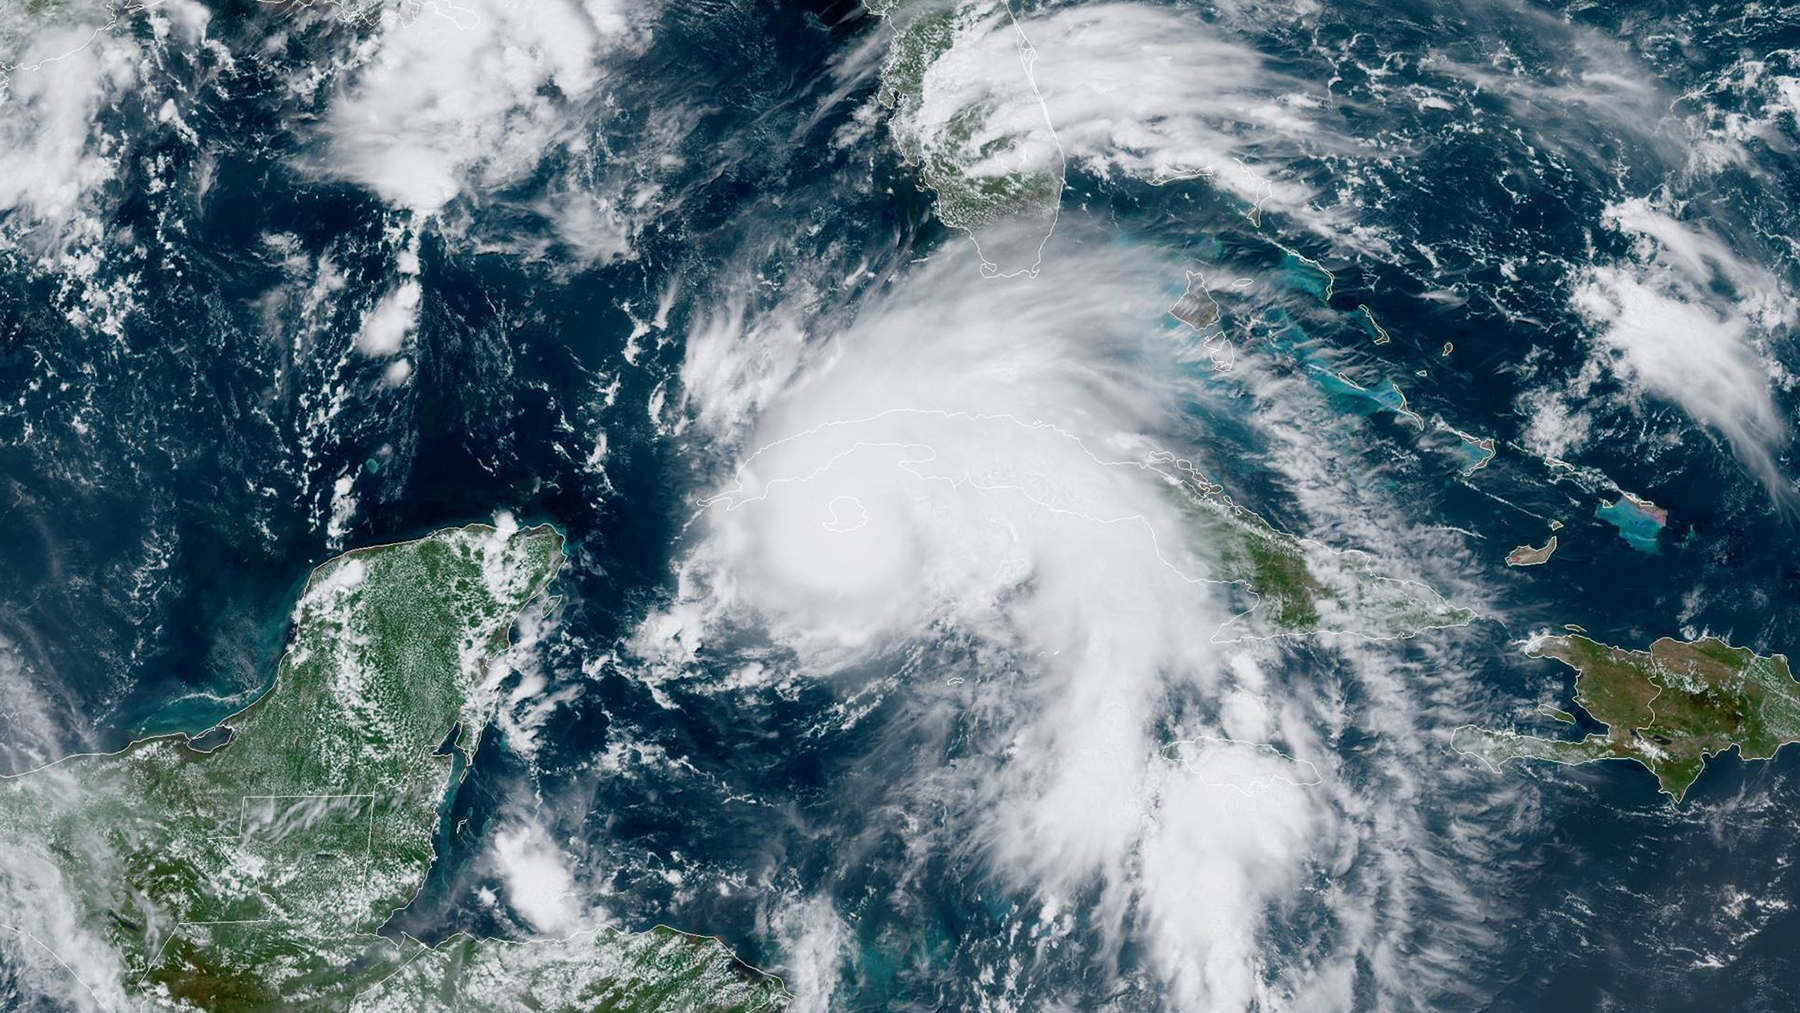 Hurricane Ida over the Caribbean on August 27, 2021. The storm made landfall in Louisiana Sunday and Direct Relief is coordinating with state and local officials about emergency medical needs. (Image courtesy of NOAA)